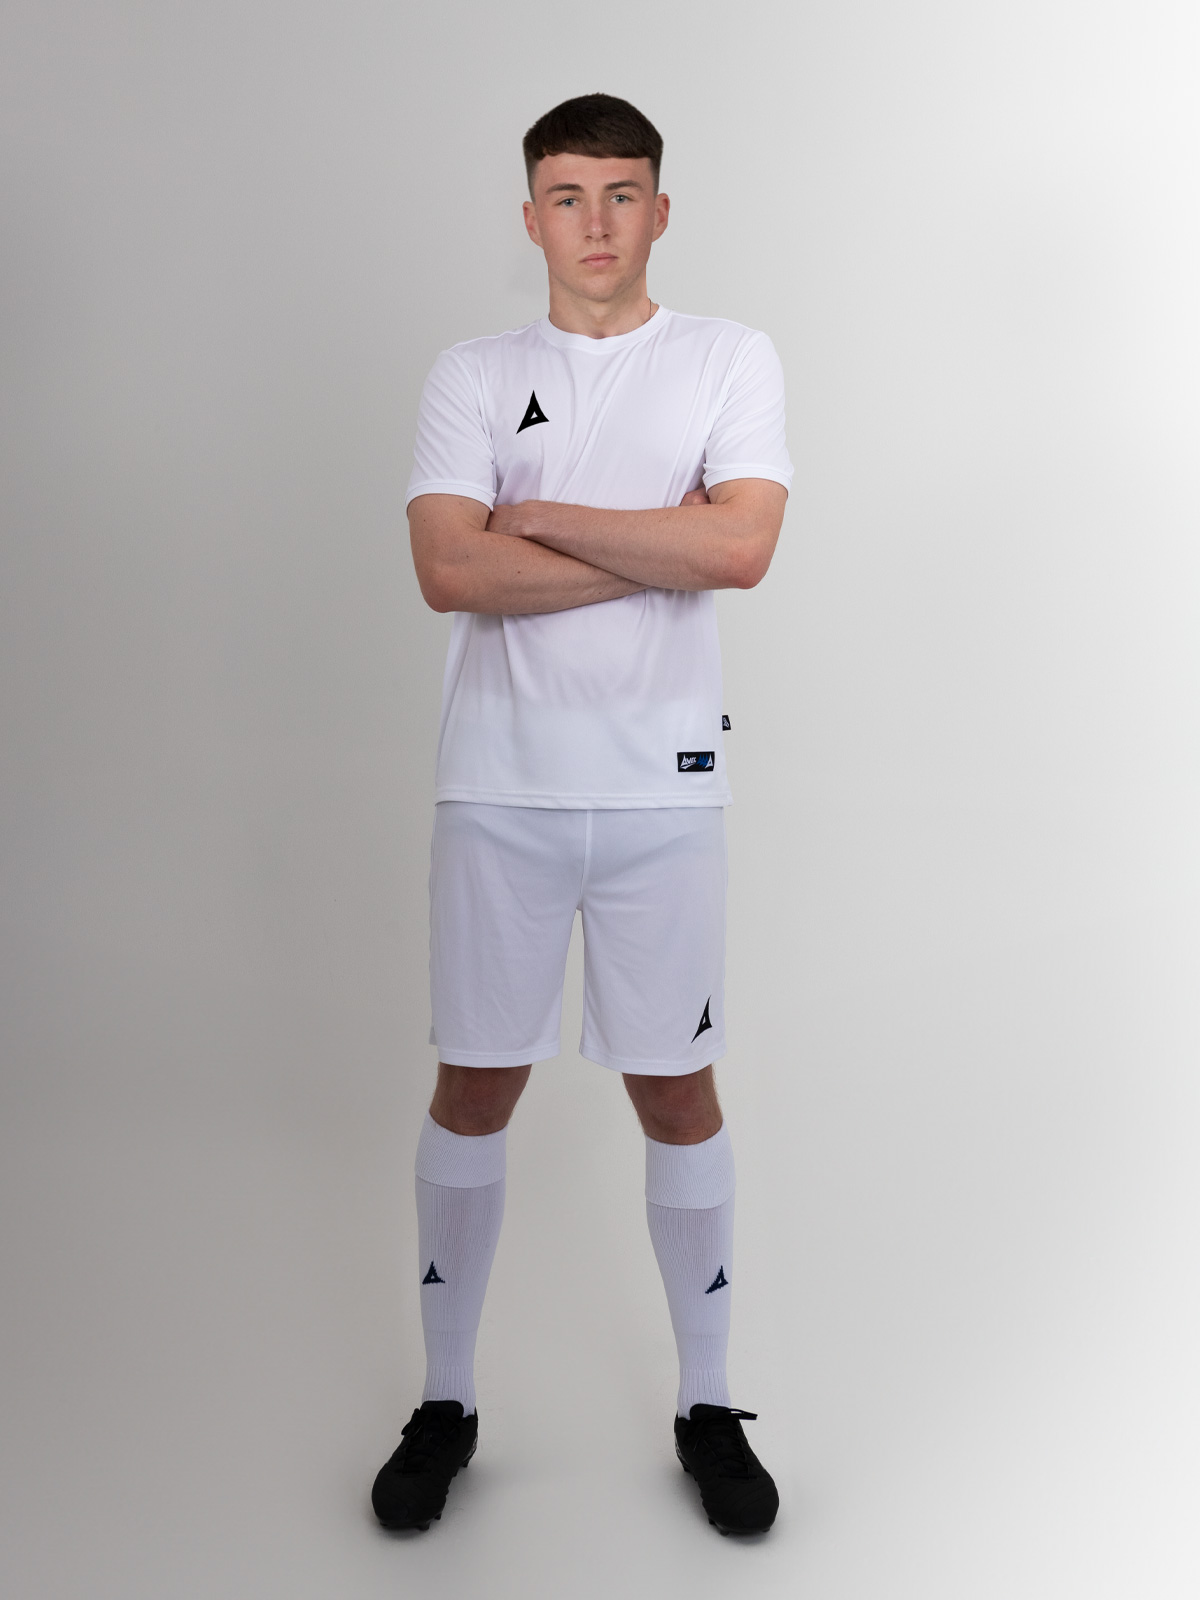 a classic design is being worn with the white football kit